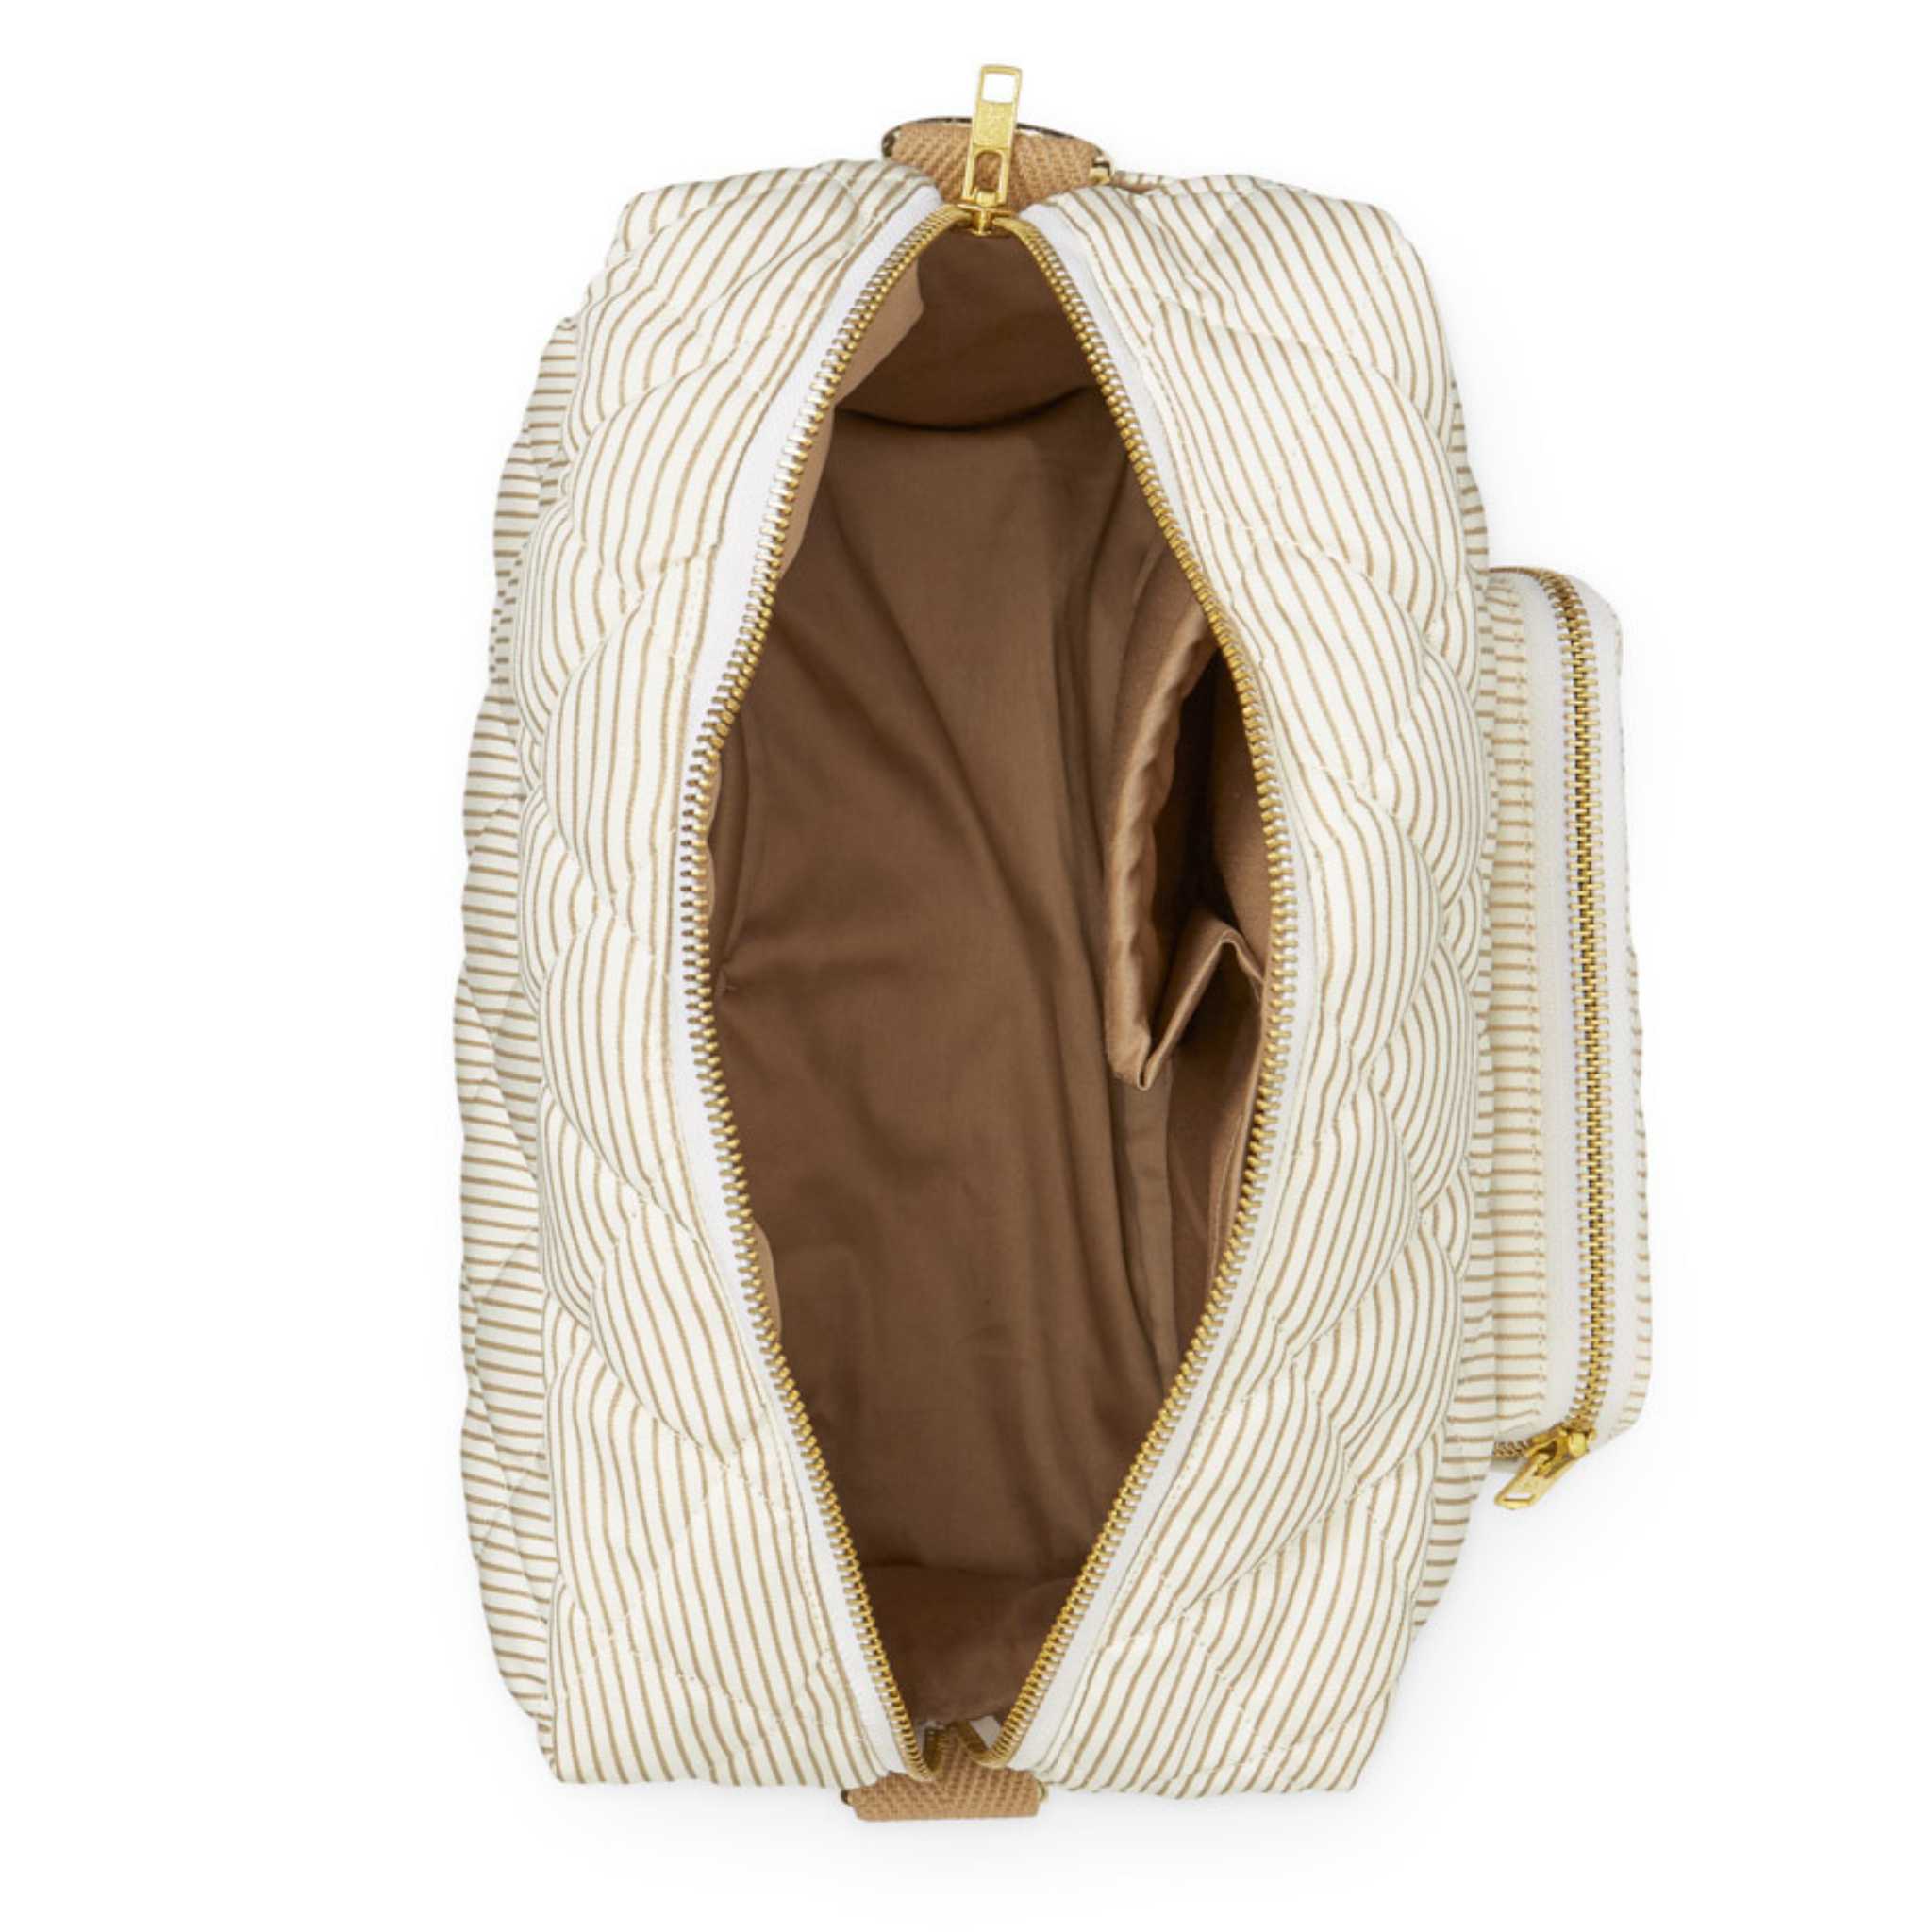 Cam Cam Small Changing Bag - Camel Stripes -Open